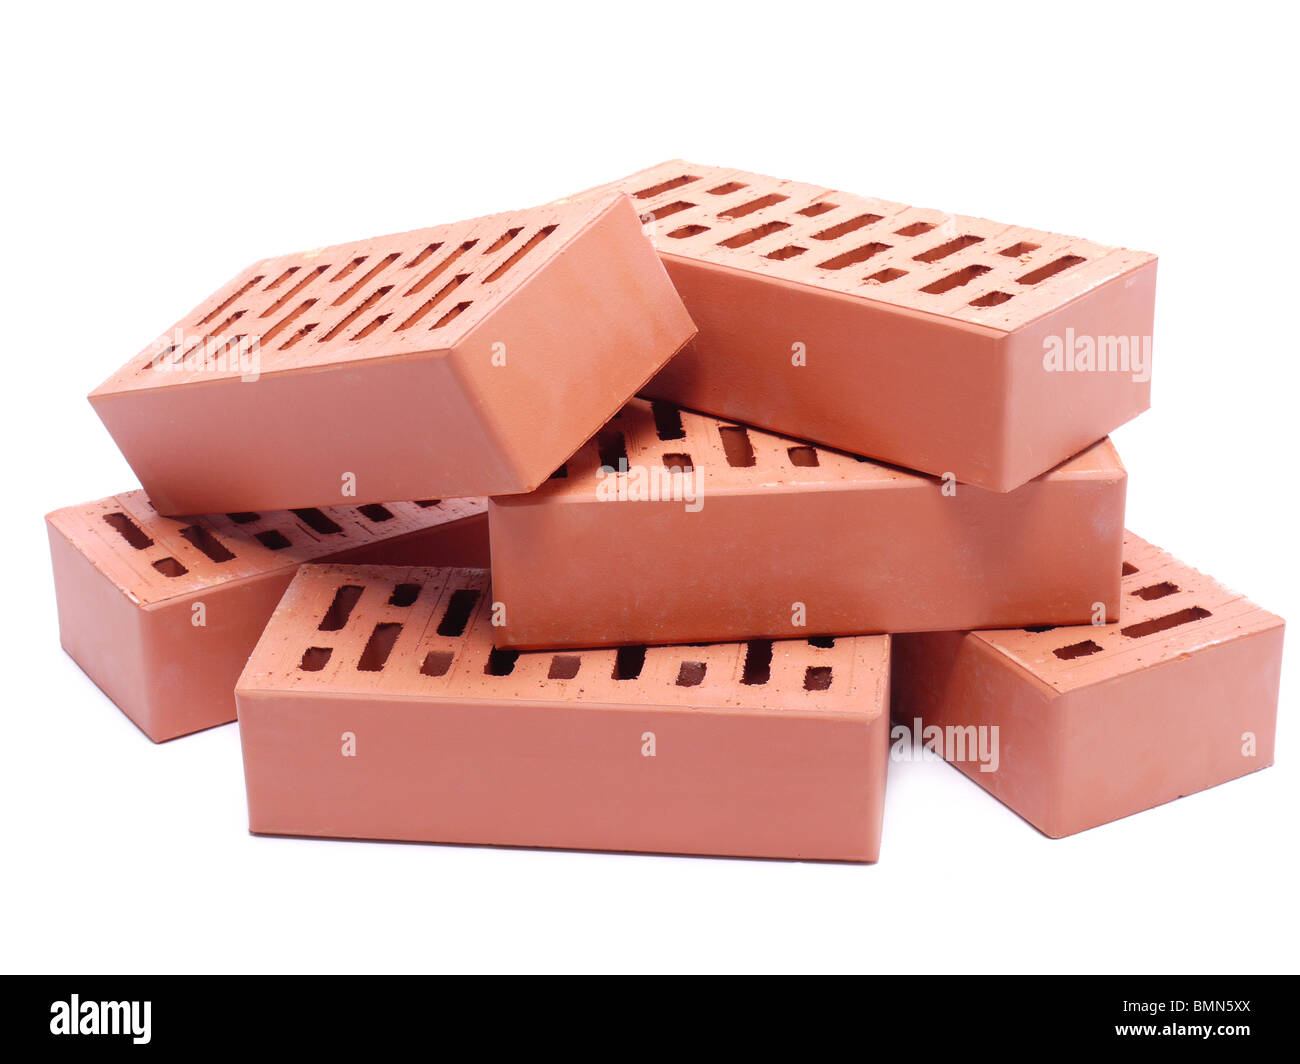 Pile of perforated bricks over white background Stock Photo